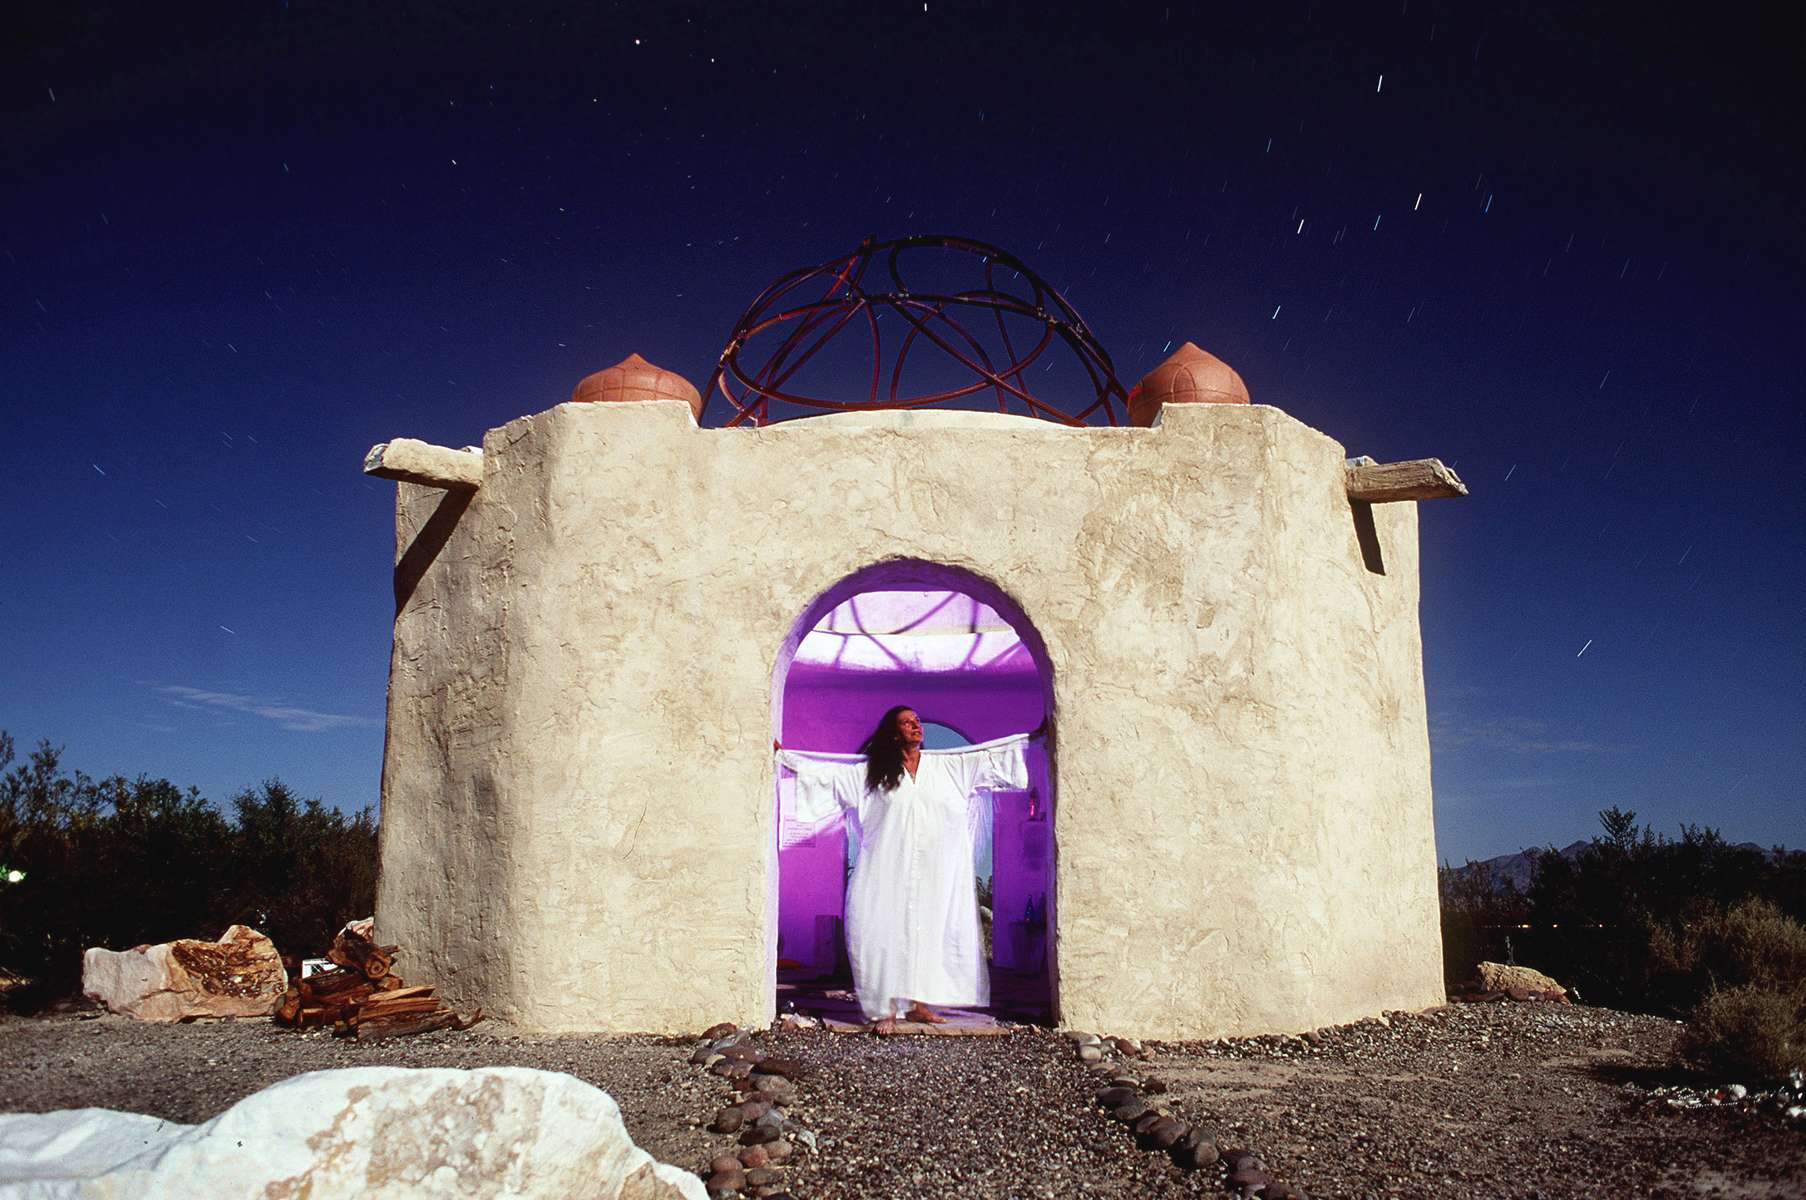 A caretaker poses in the Temple of Goddess Spirituality located in Indian Springs, Nevada. The photo was taken between 1999-2008. I tried to find out who she was but haven't had luck.